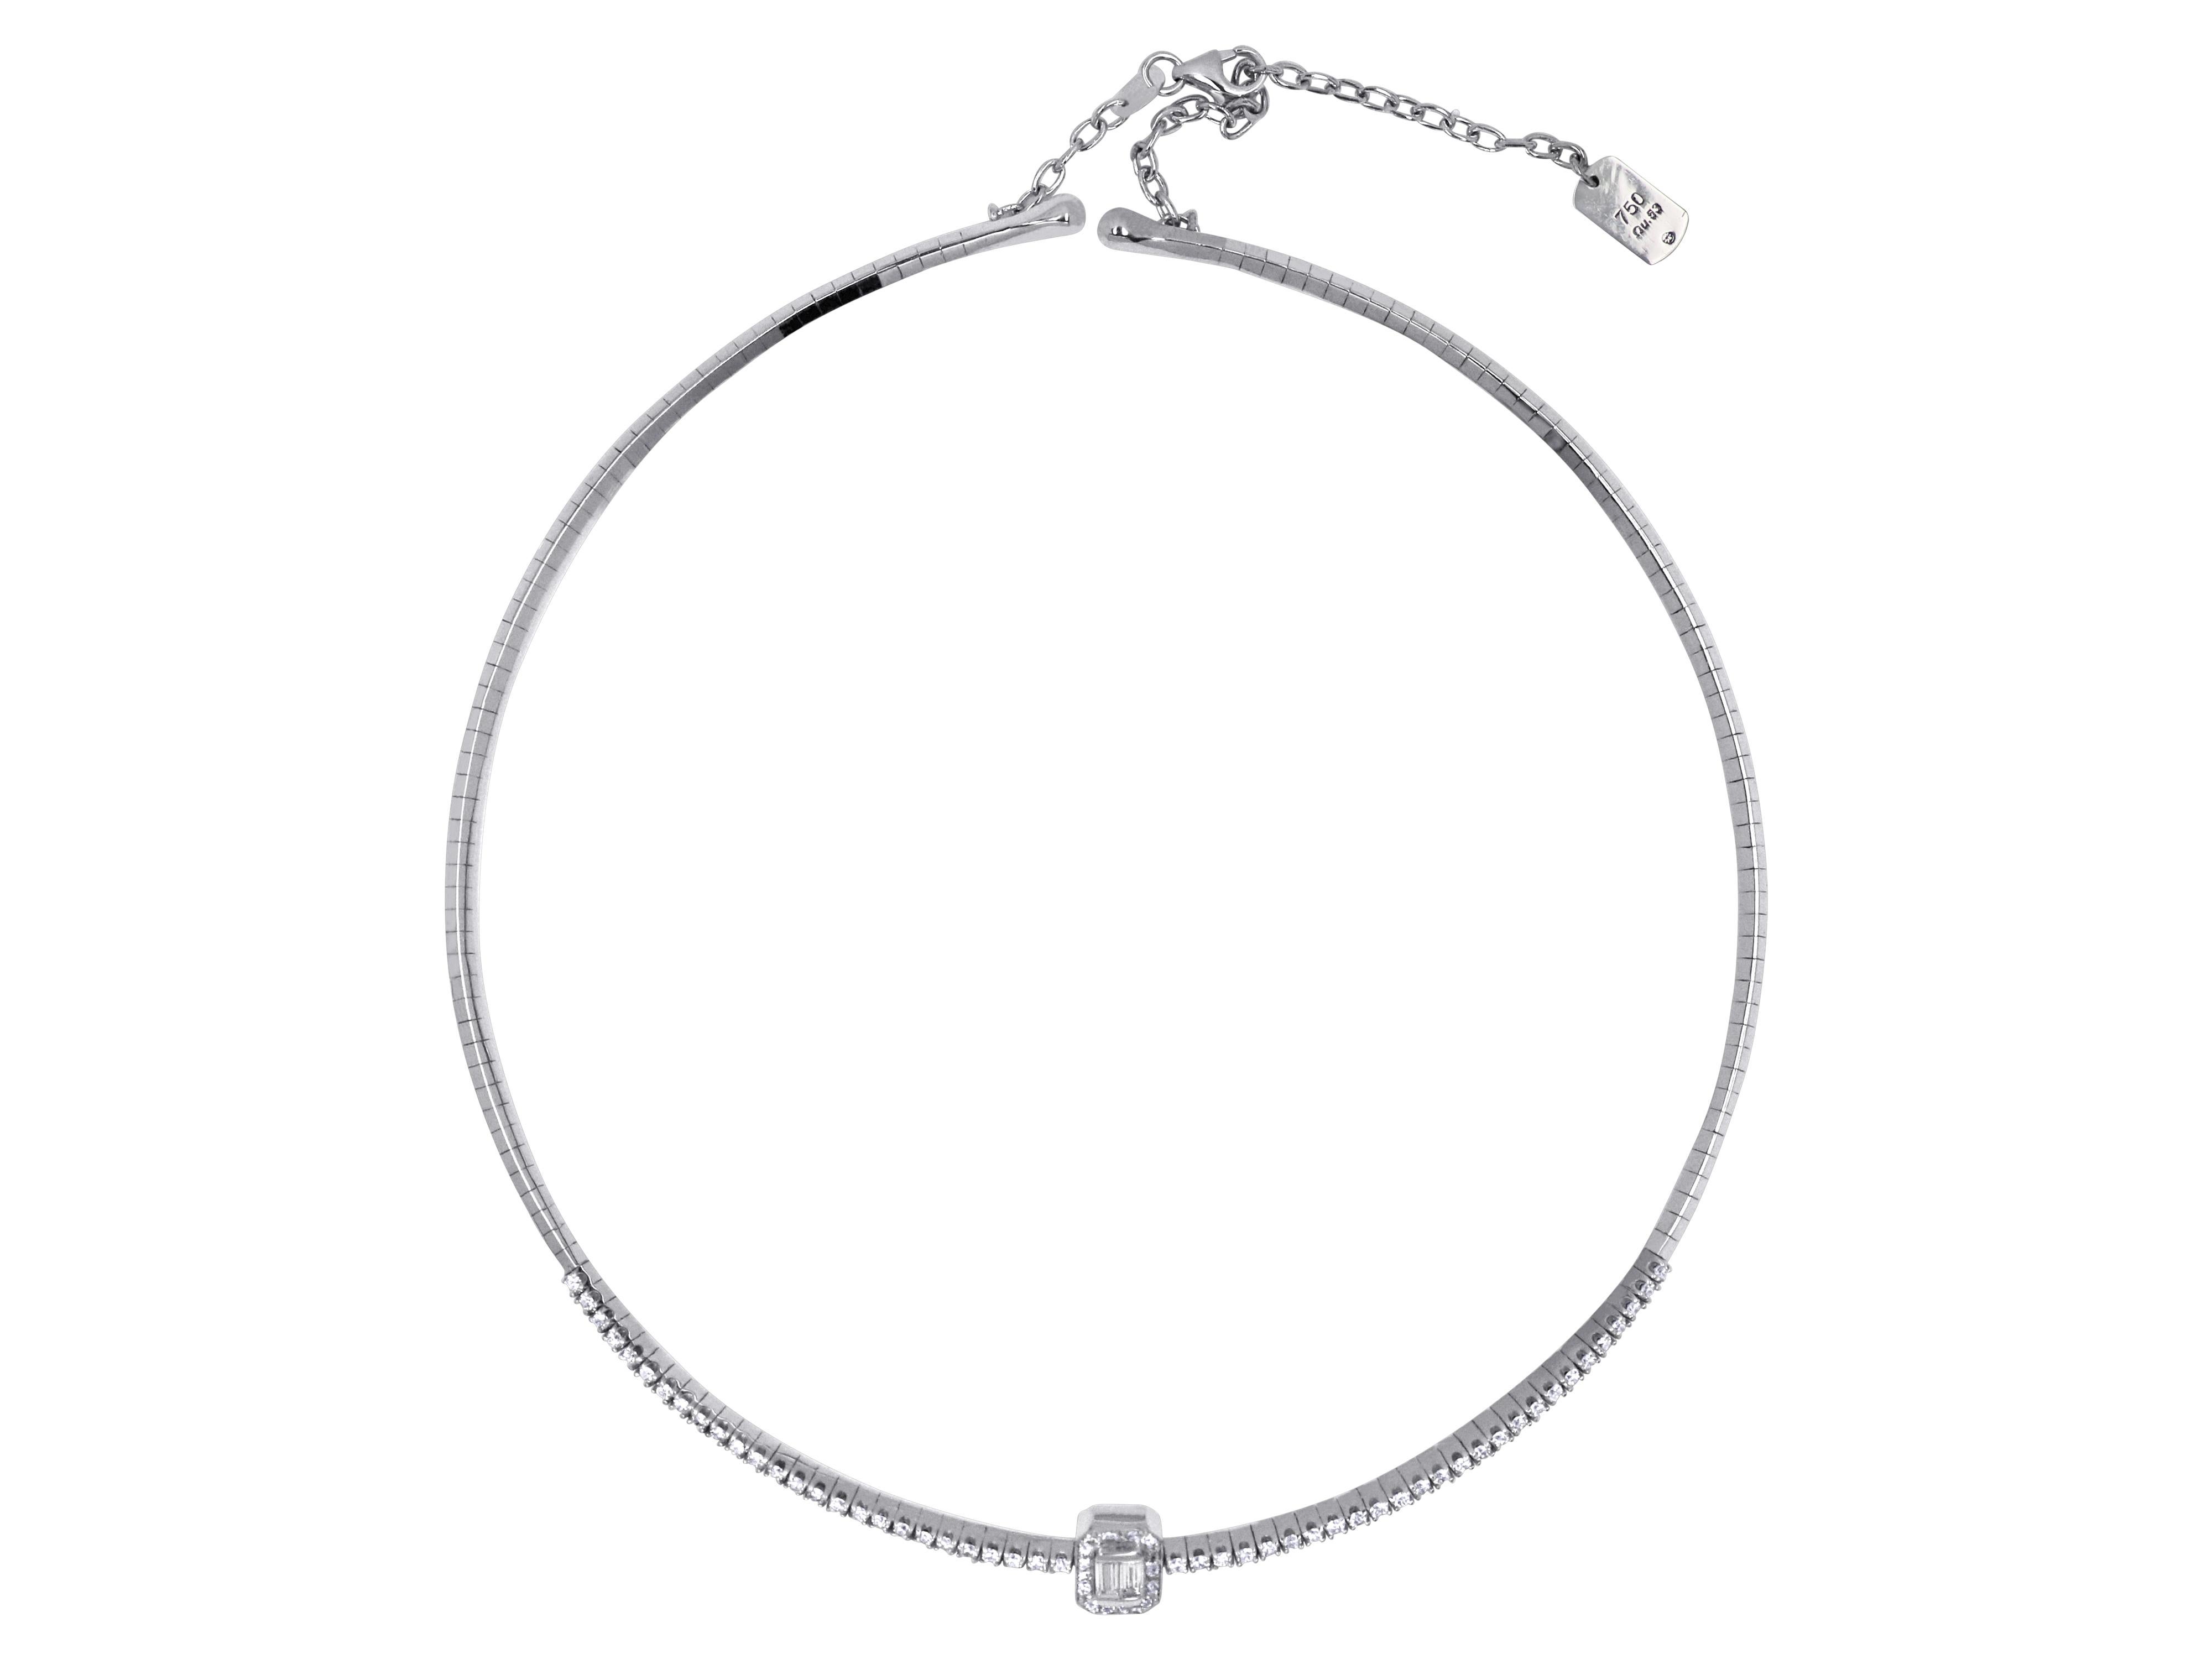 Collar necklace in 18k white gold with 1.33 carats diamonds and adjustable length with extra links.

Max. length: 14.960”, 38cm
Min. length: 12.598”, 32cm
